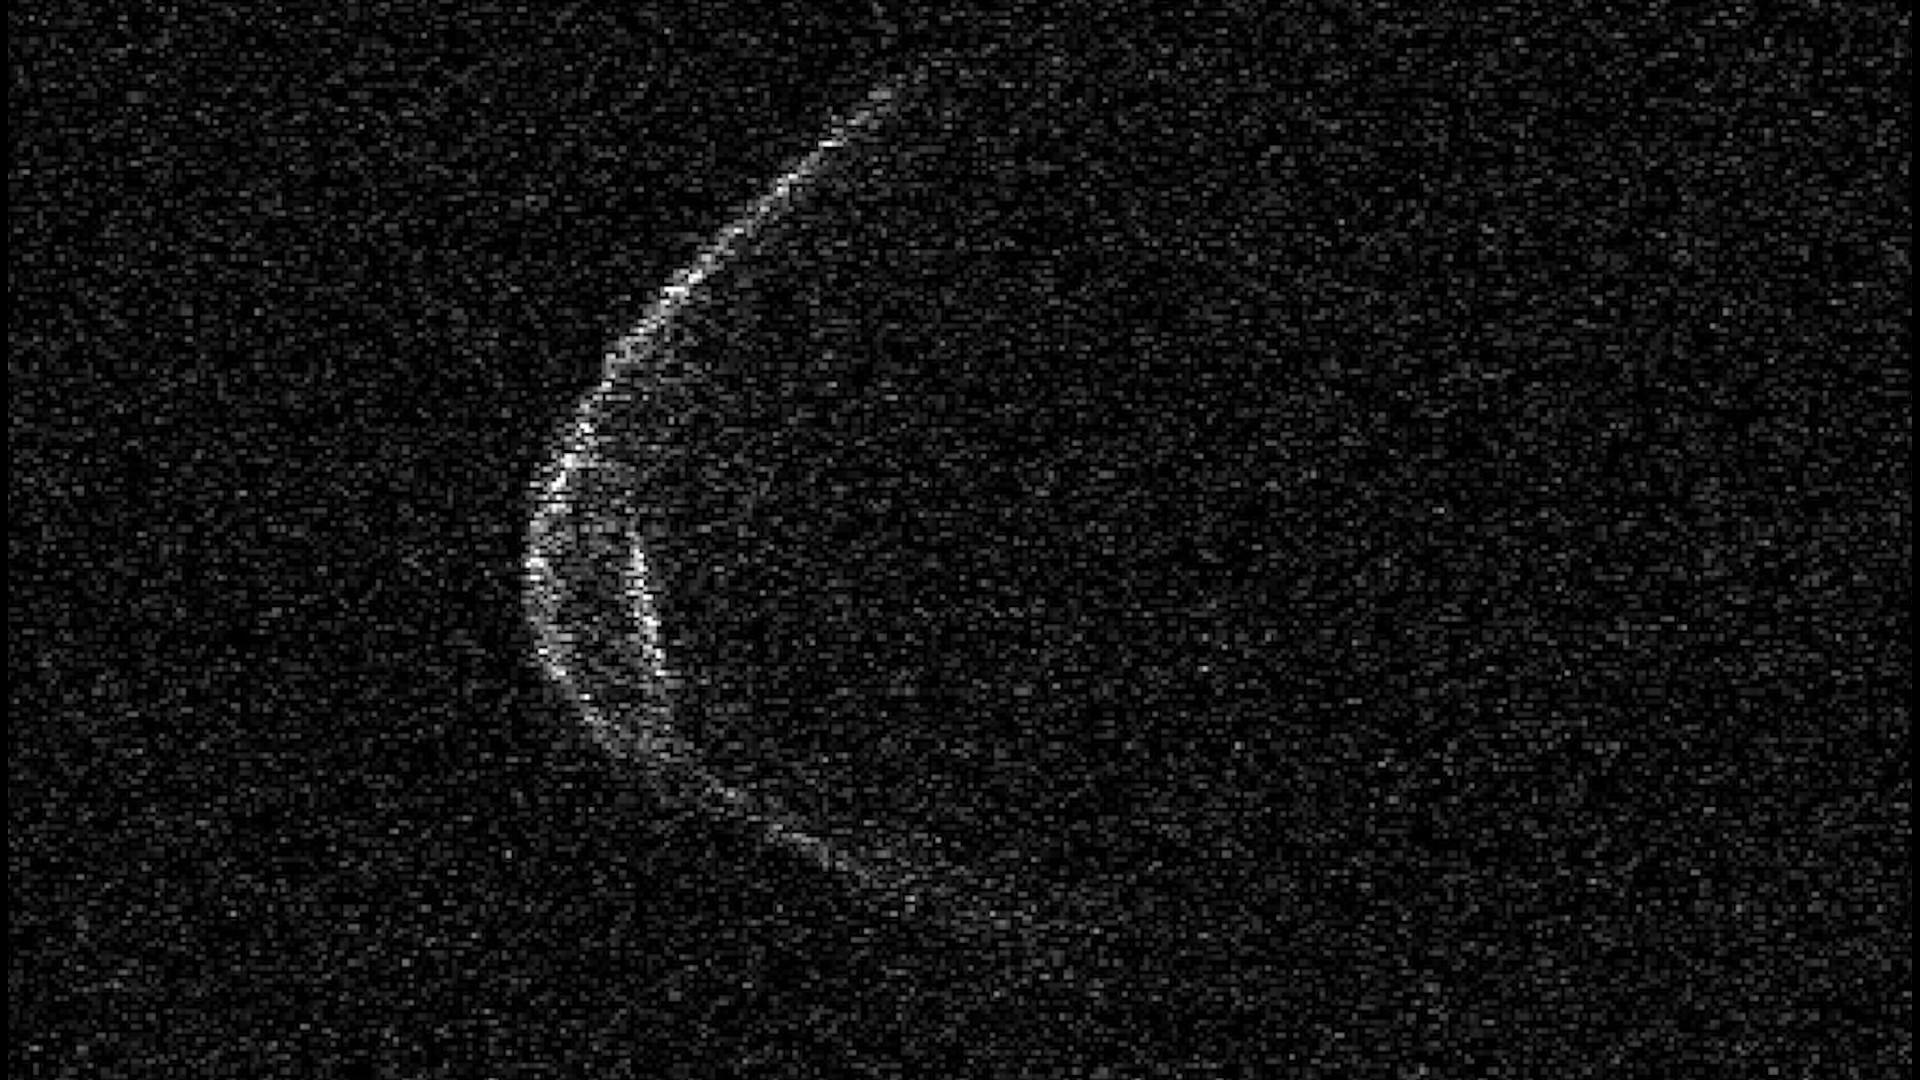 Astronomers just captured asteroid 1998 OR2 as it makes its way towards us for a close, but safe, Earth flyby.